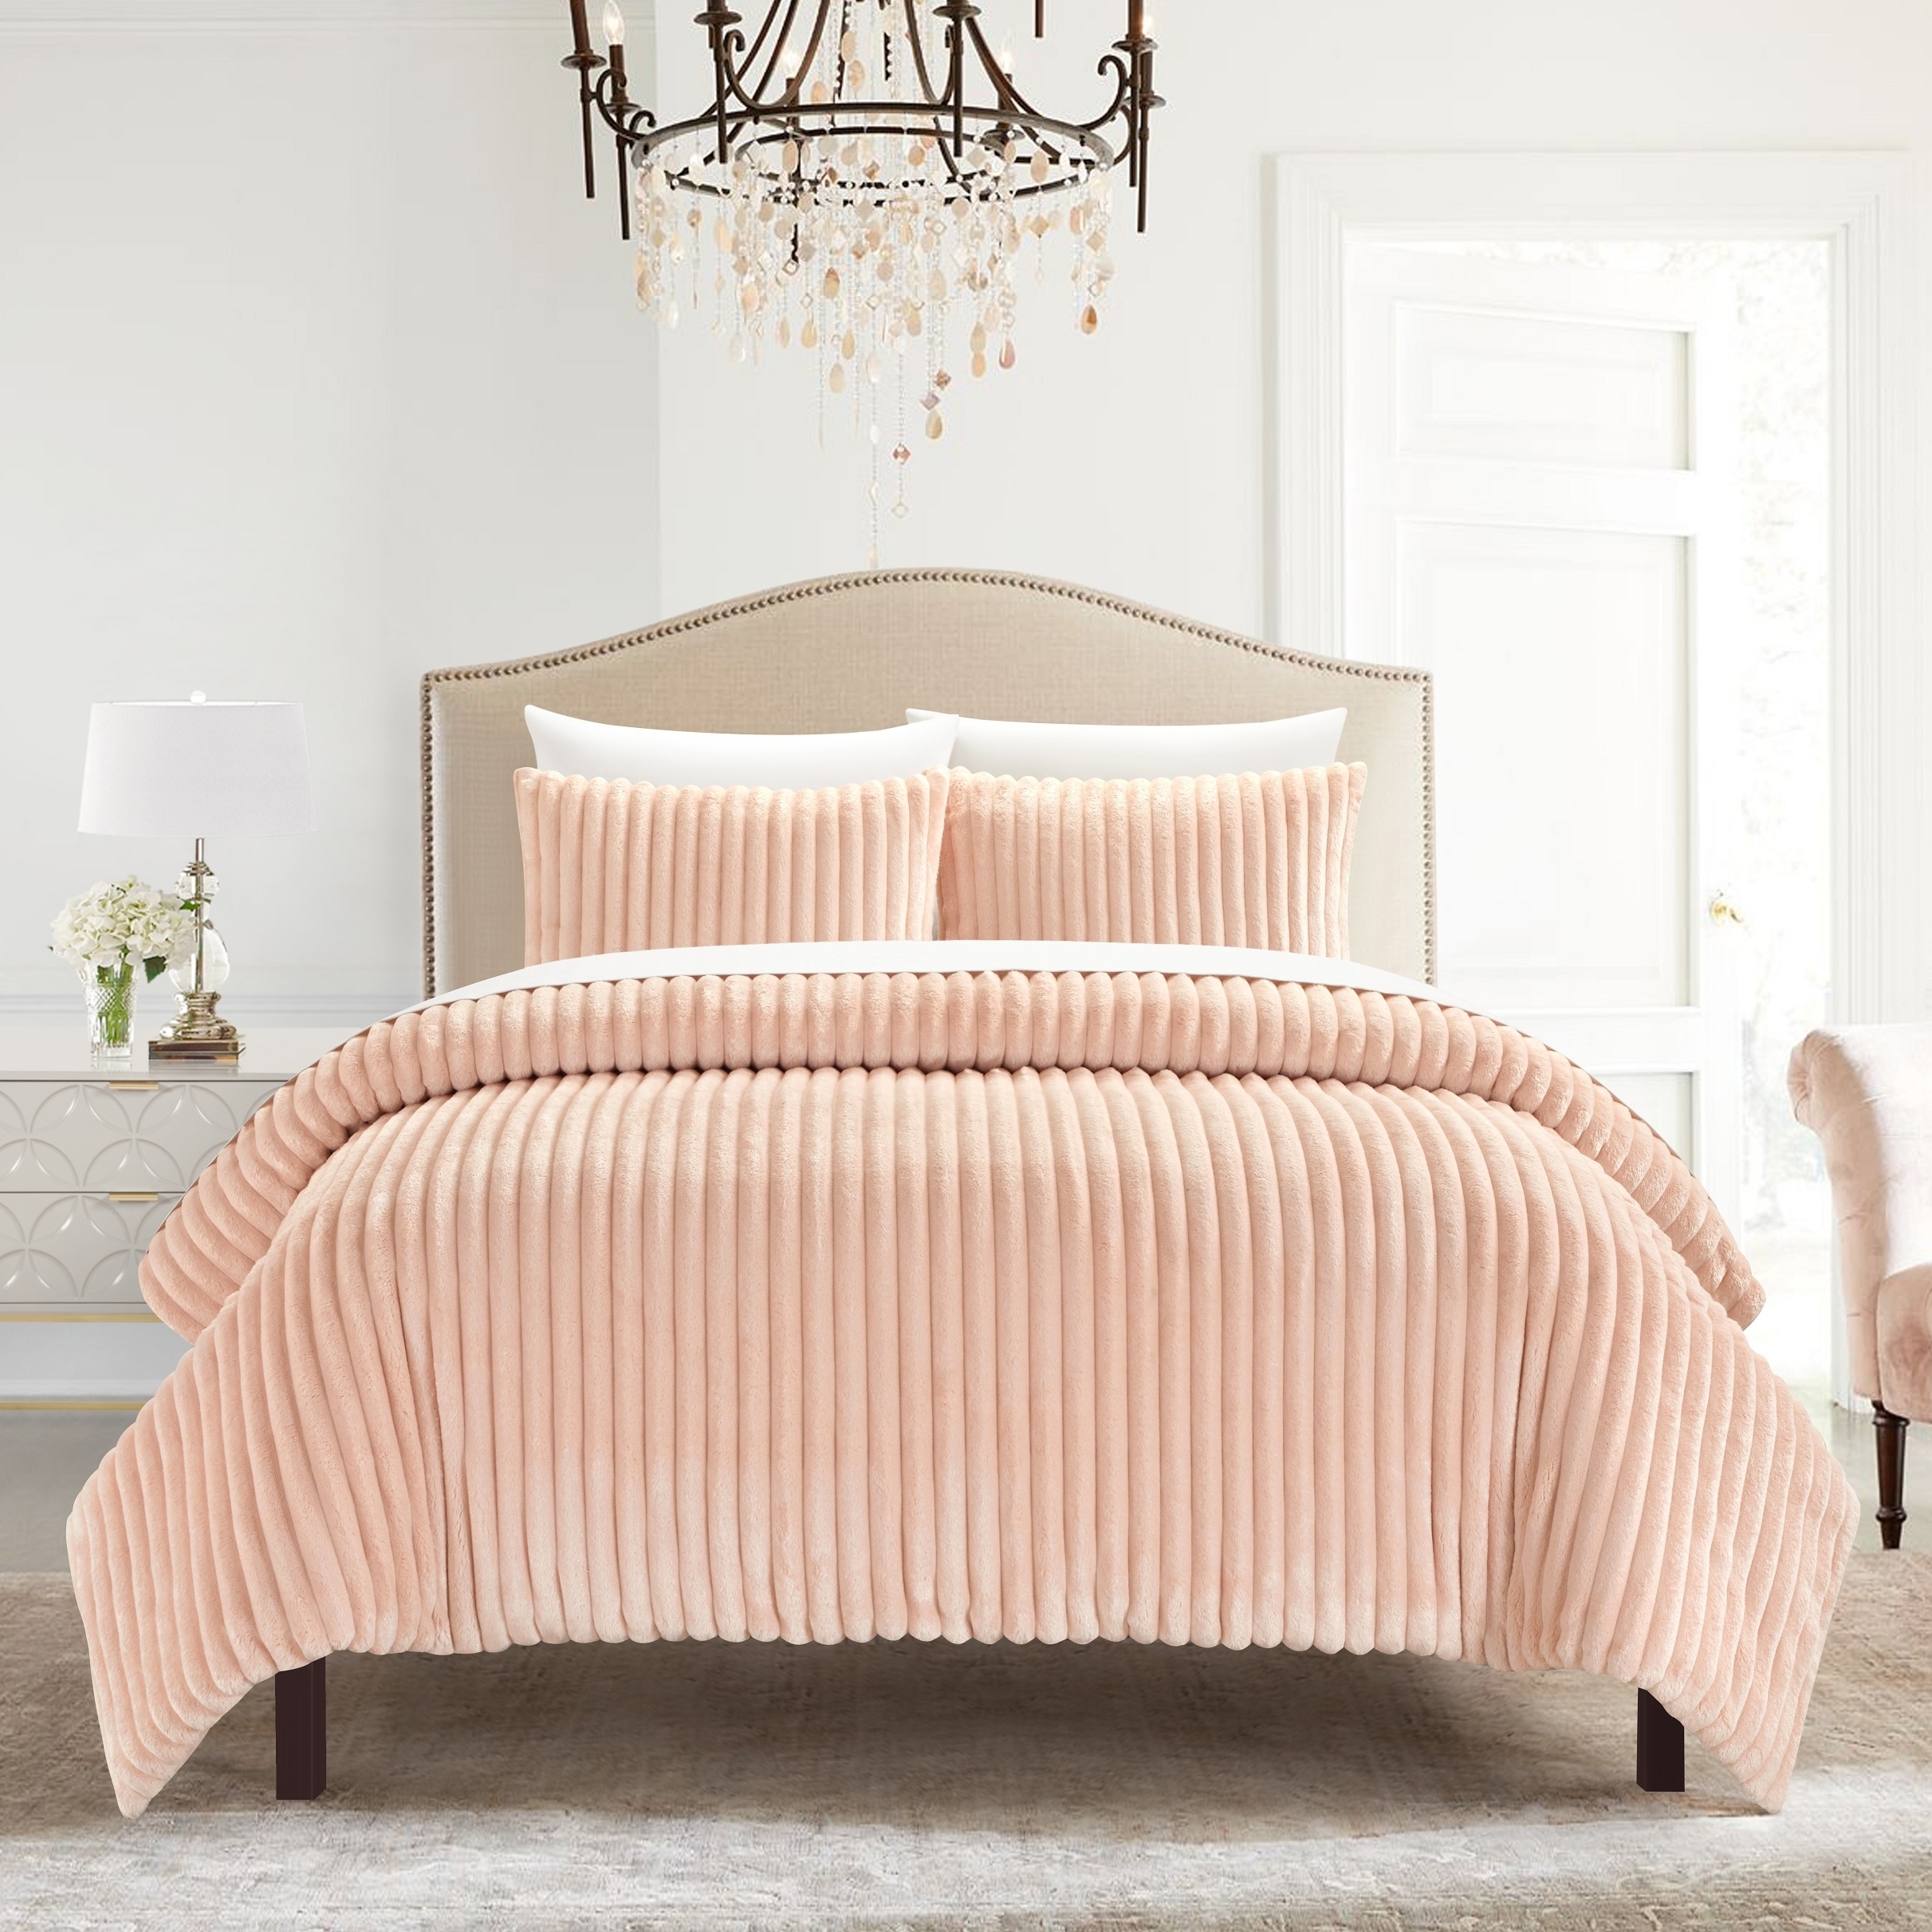 Pabrico 3 Or 2 Piece Comforter Set Microplush Channel Quilted - Blush, King - 3 Piece